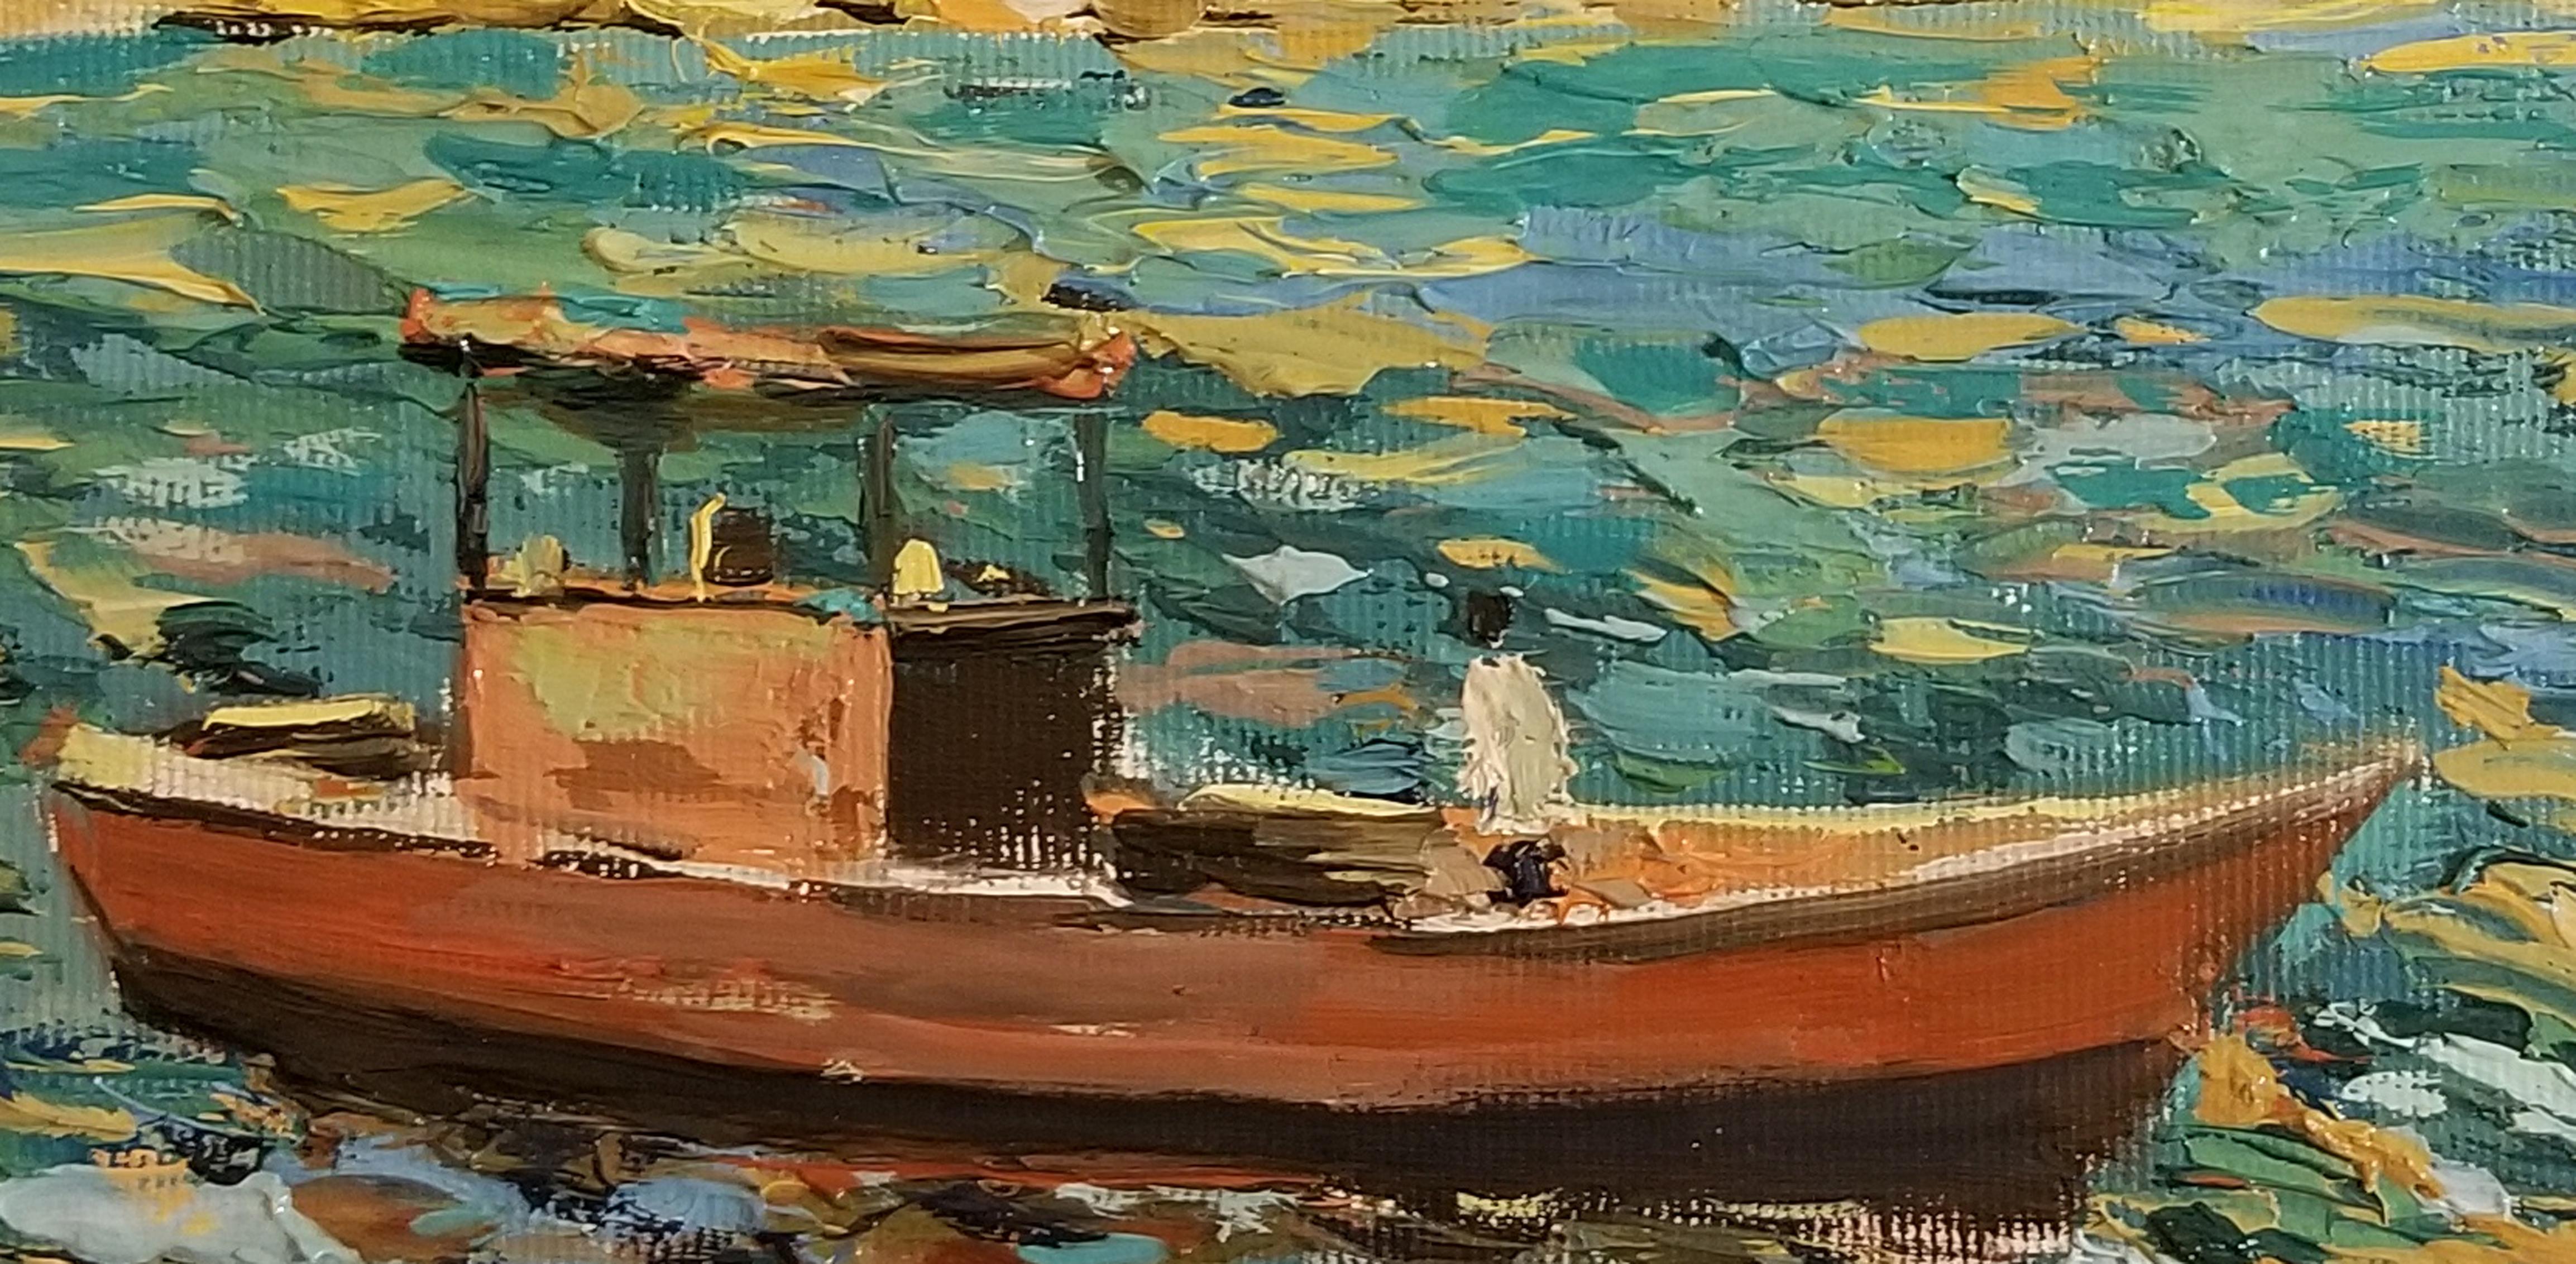 Red Boat, Coastal, Impressionism, Original oil Painting, One of a Kind - Brown Landscape Painting by Ara H. Hakobyan